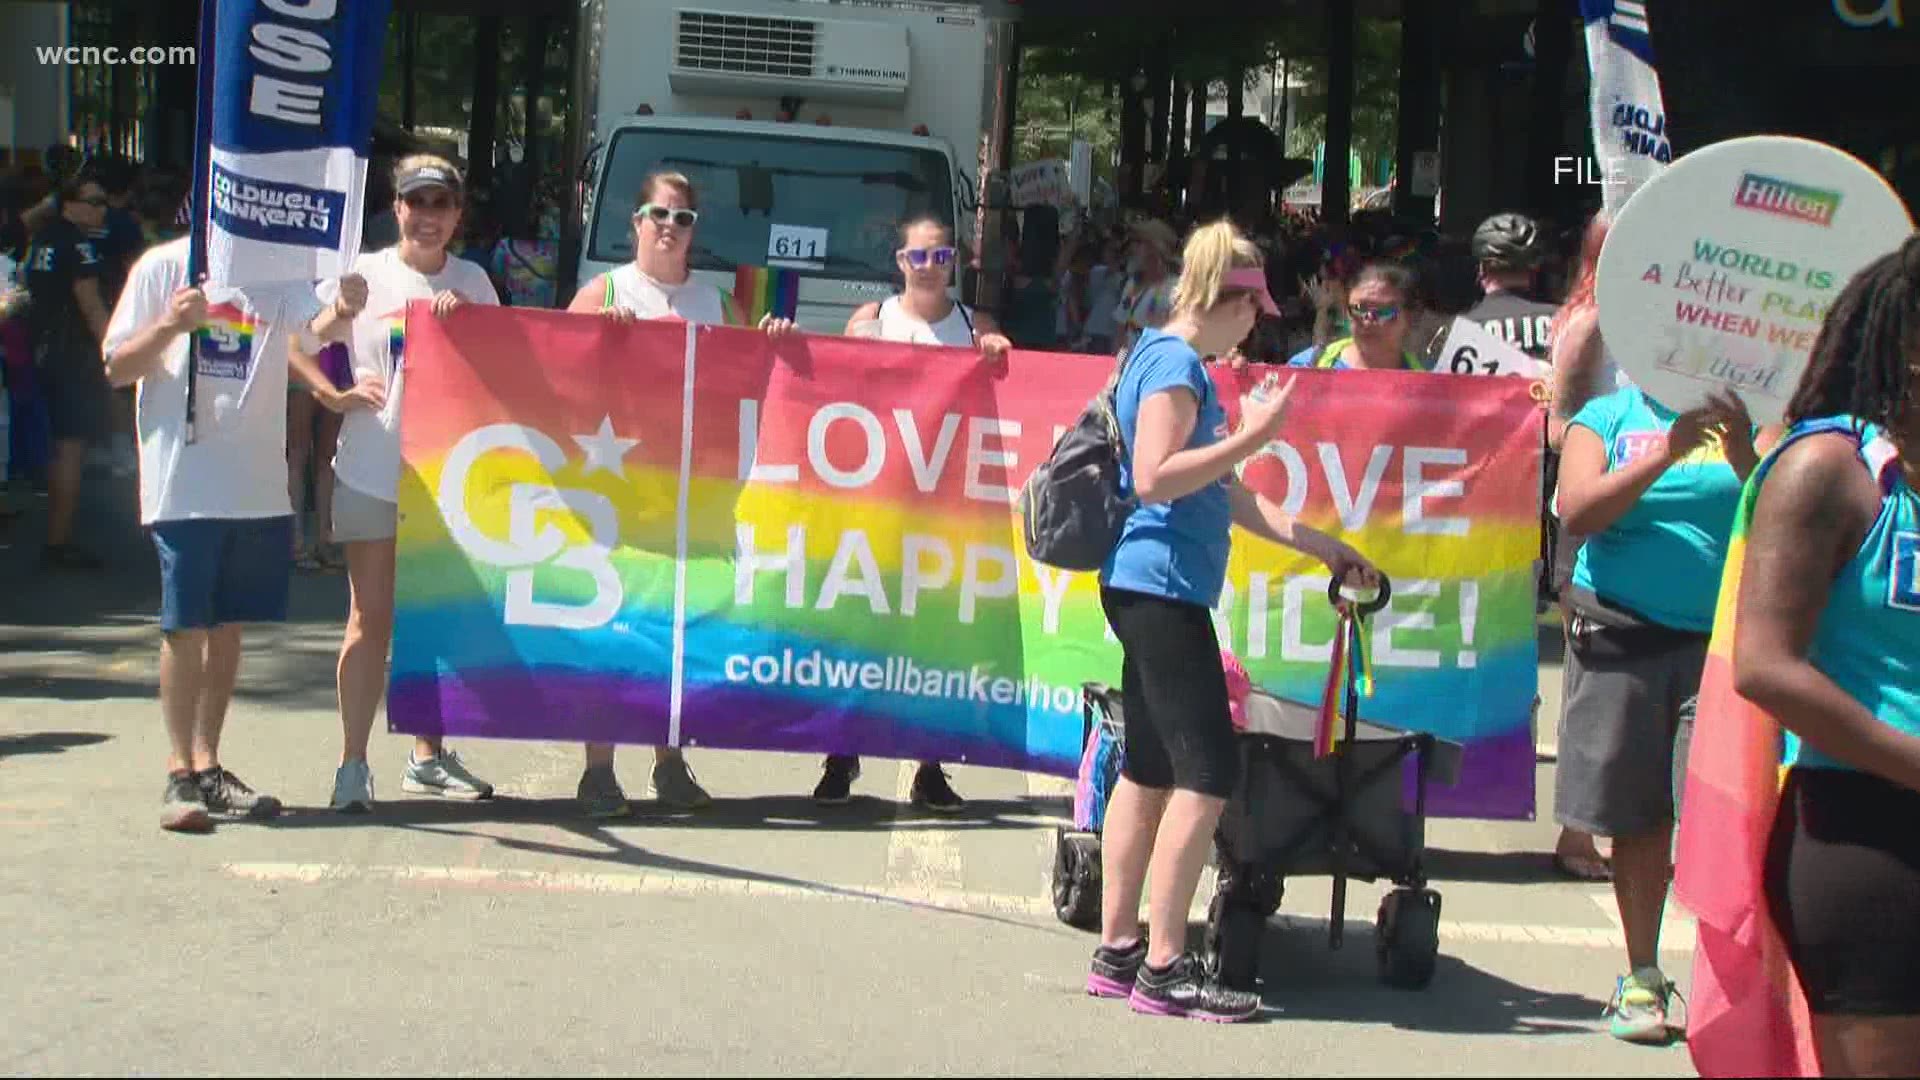 Monday night, Charlotte Mayor Vi Lyles announced the city planned to expand its nondiscrimination ordinance in August.